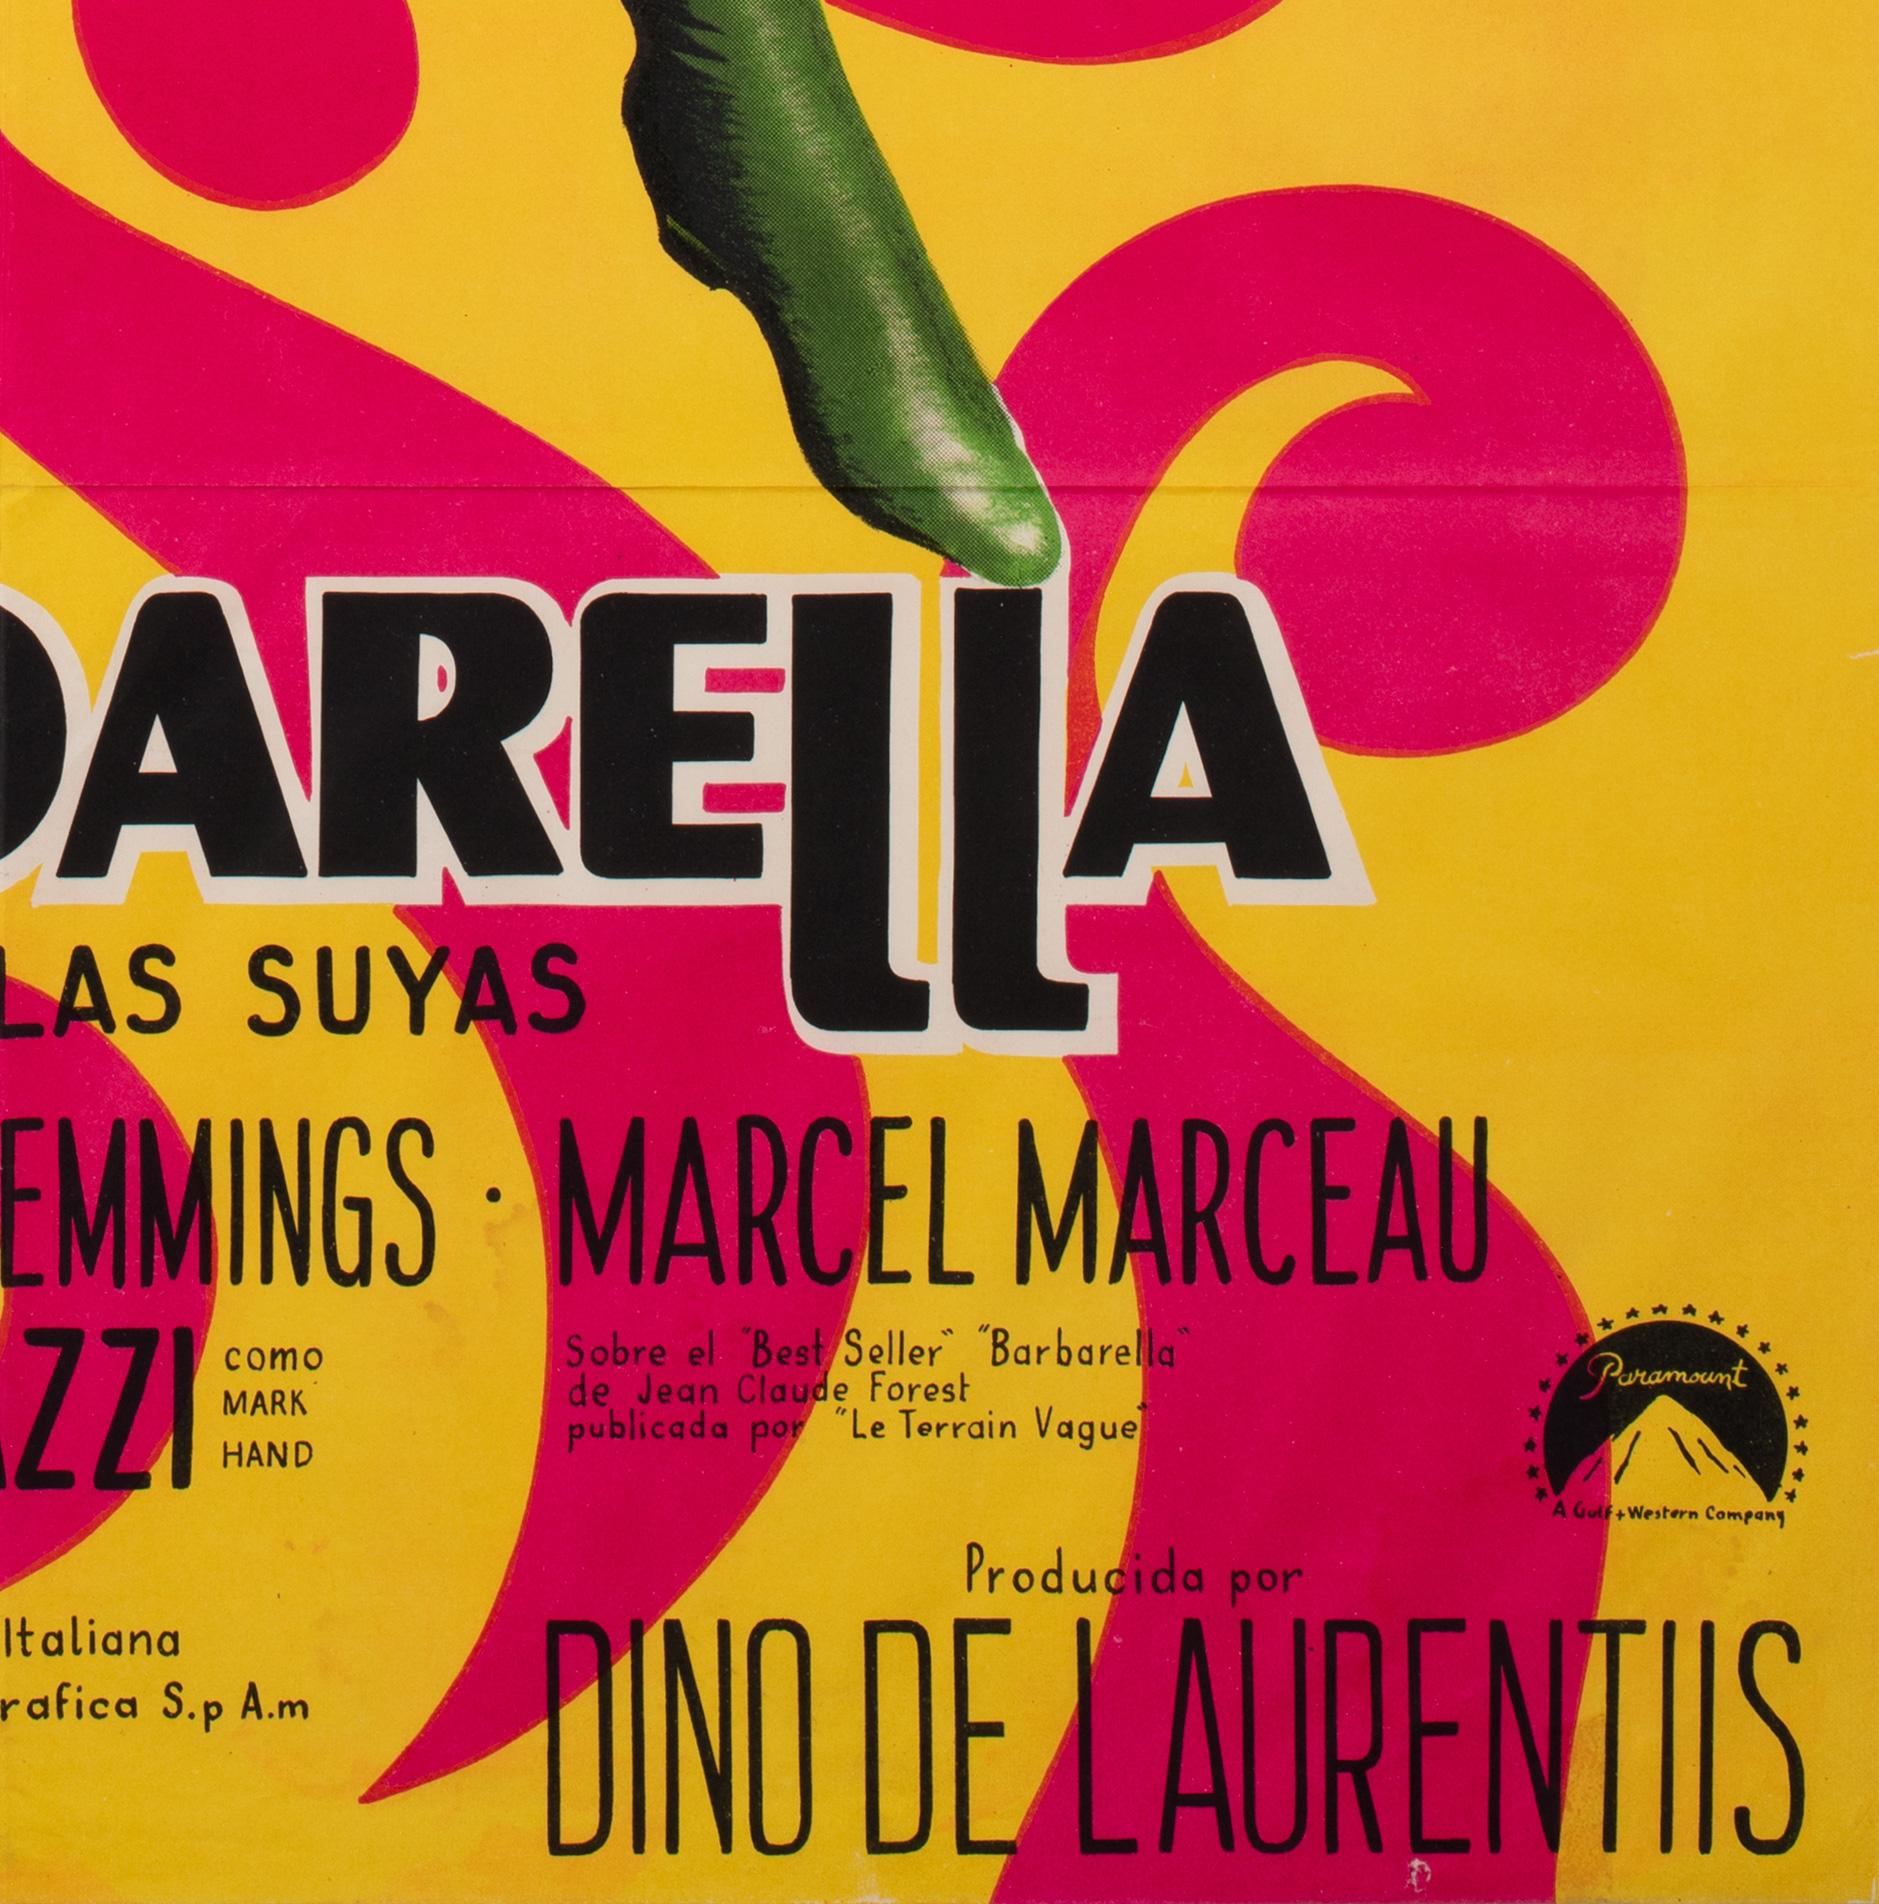 20th Century BARBARELLA 1968 Argentinian 1 Sheet Film Poster For Sale